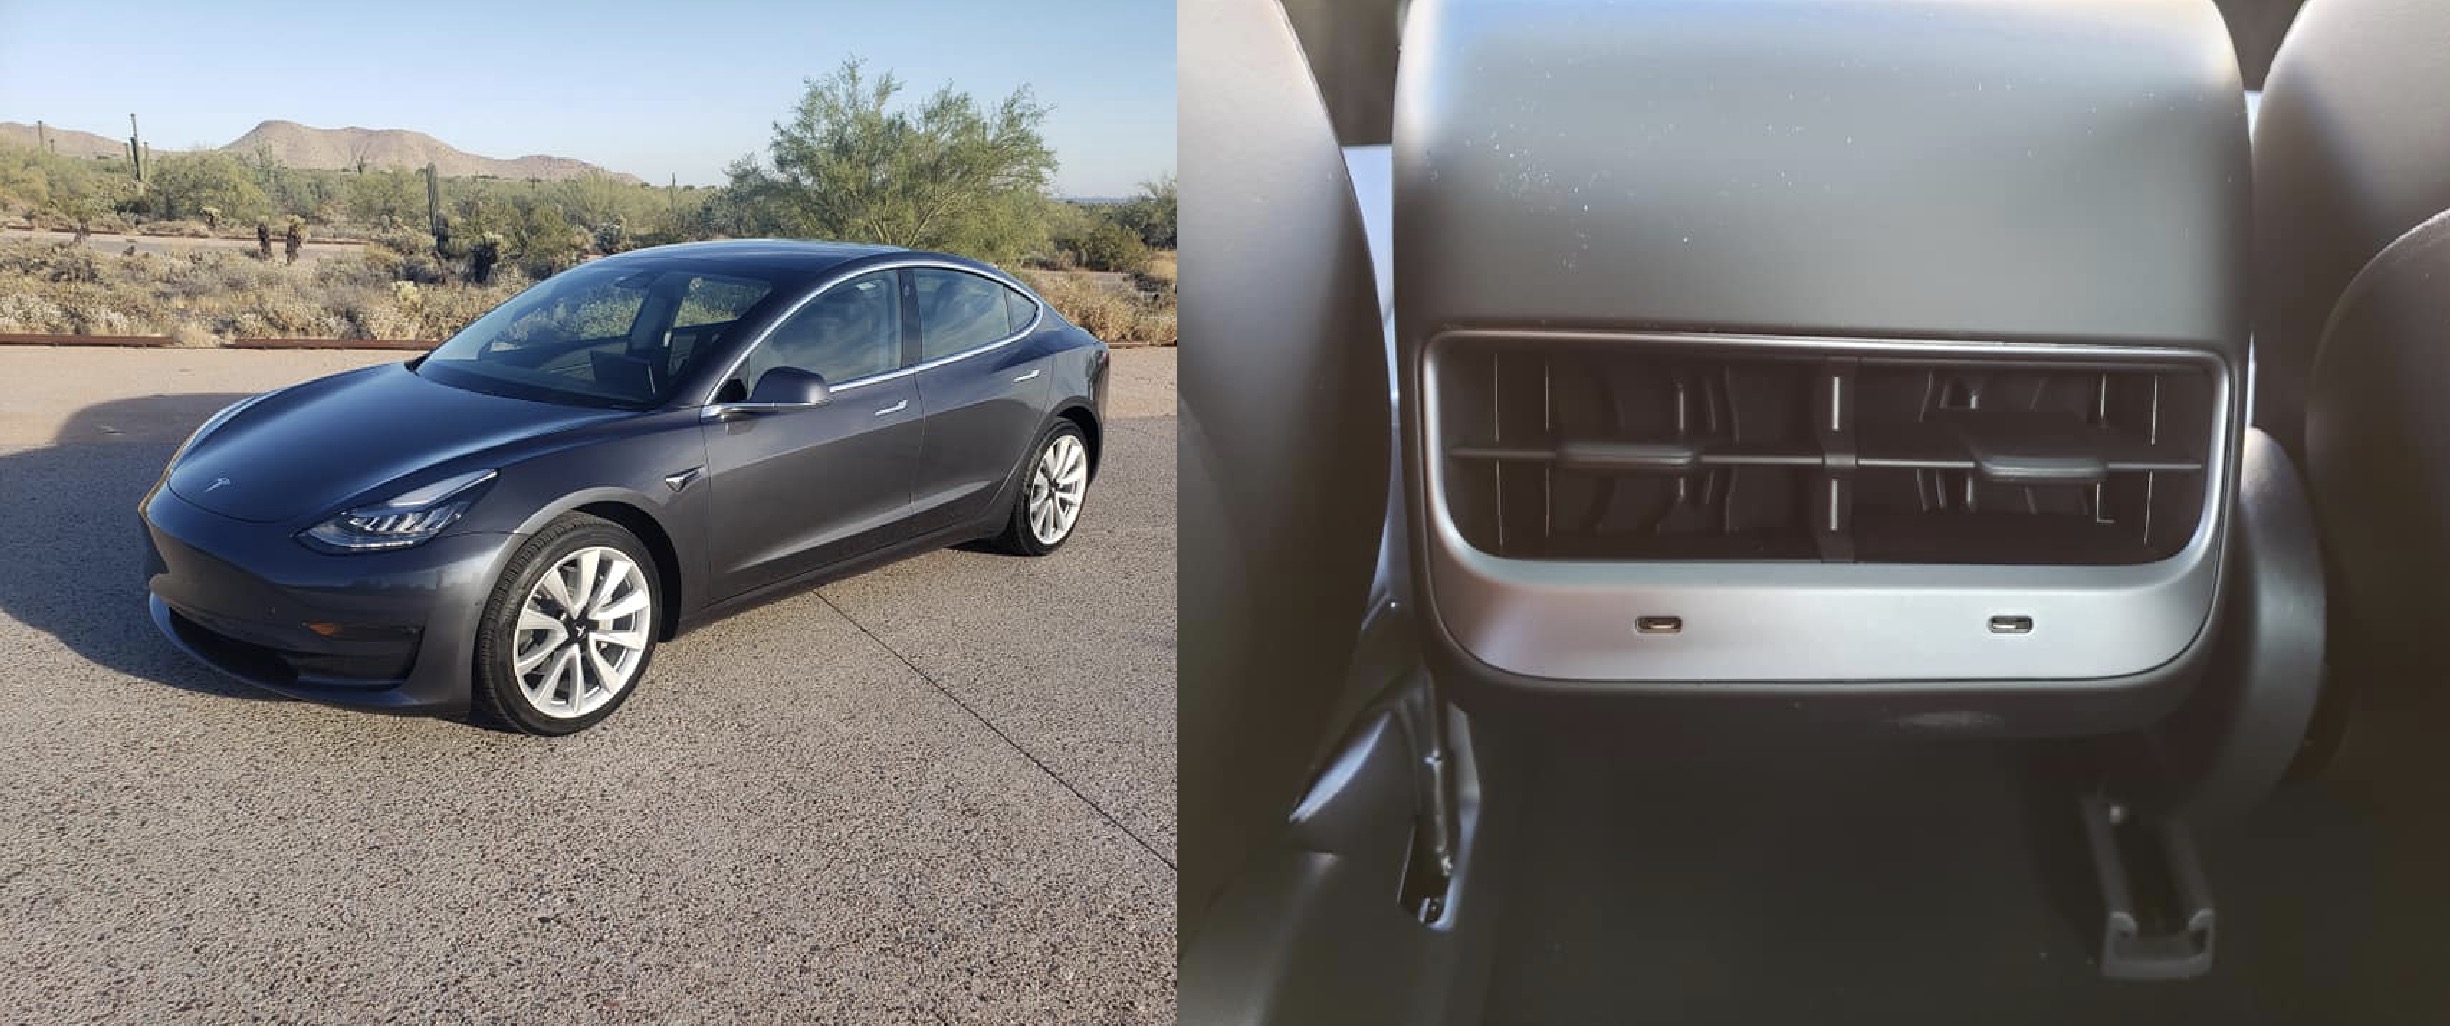 Tesla upgrades US-made Model 3 with wireless charger and USB-C ports